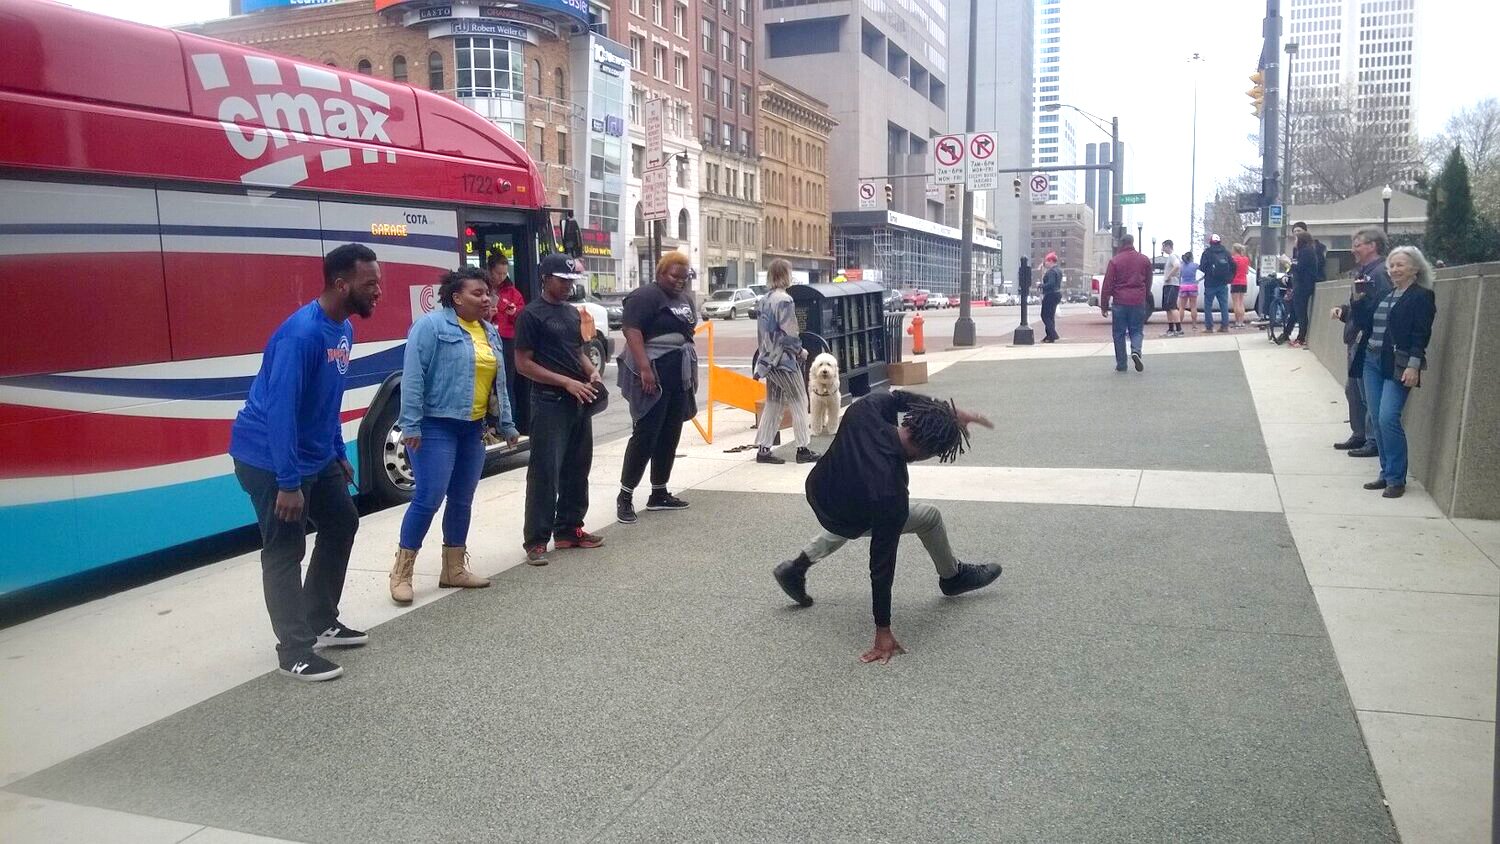  Wednesday, April 25, ​Mobilize - Health and Transportation: Dancing with TRANSIT ARTS including: Rese, Spain, Skater Drew, Katerina, and Spector 